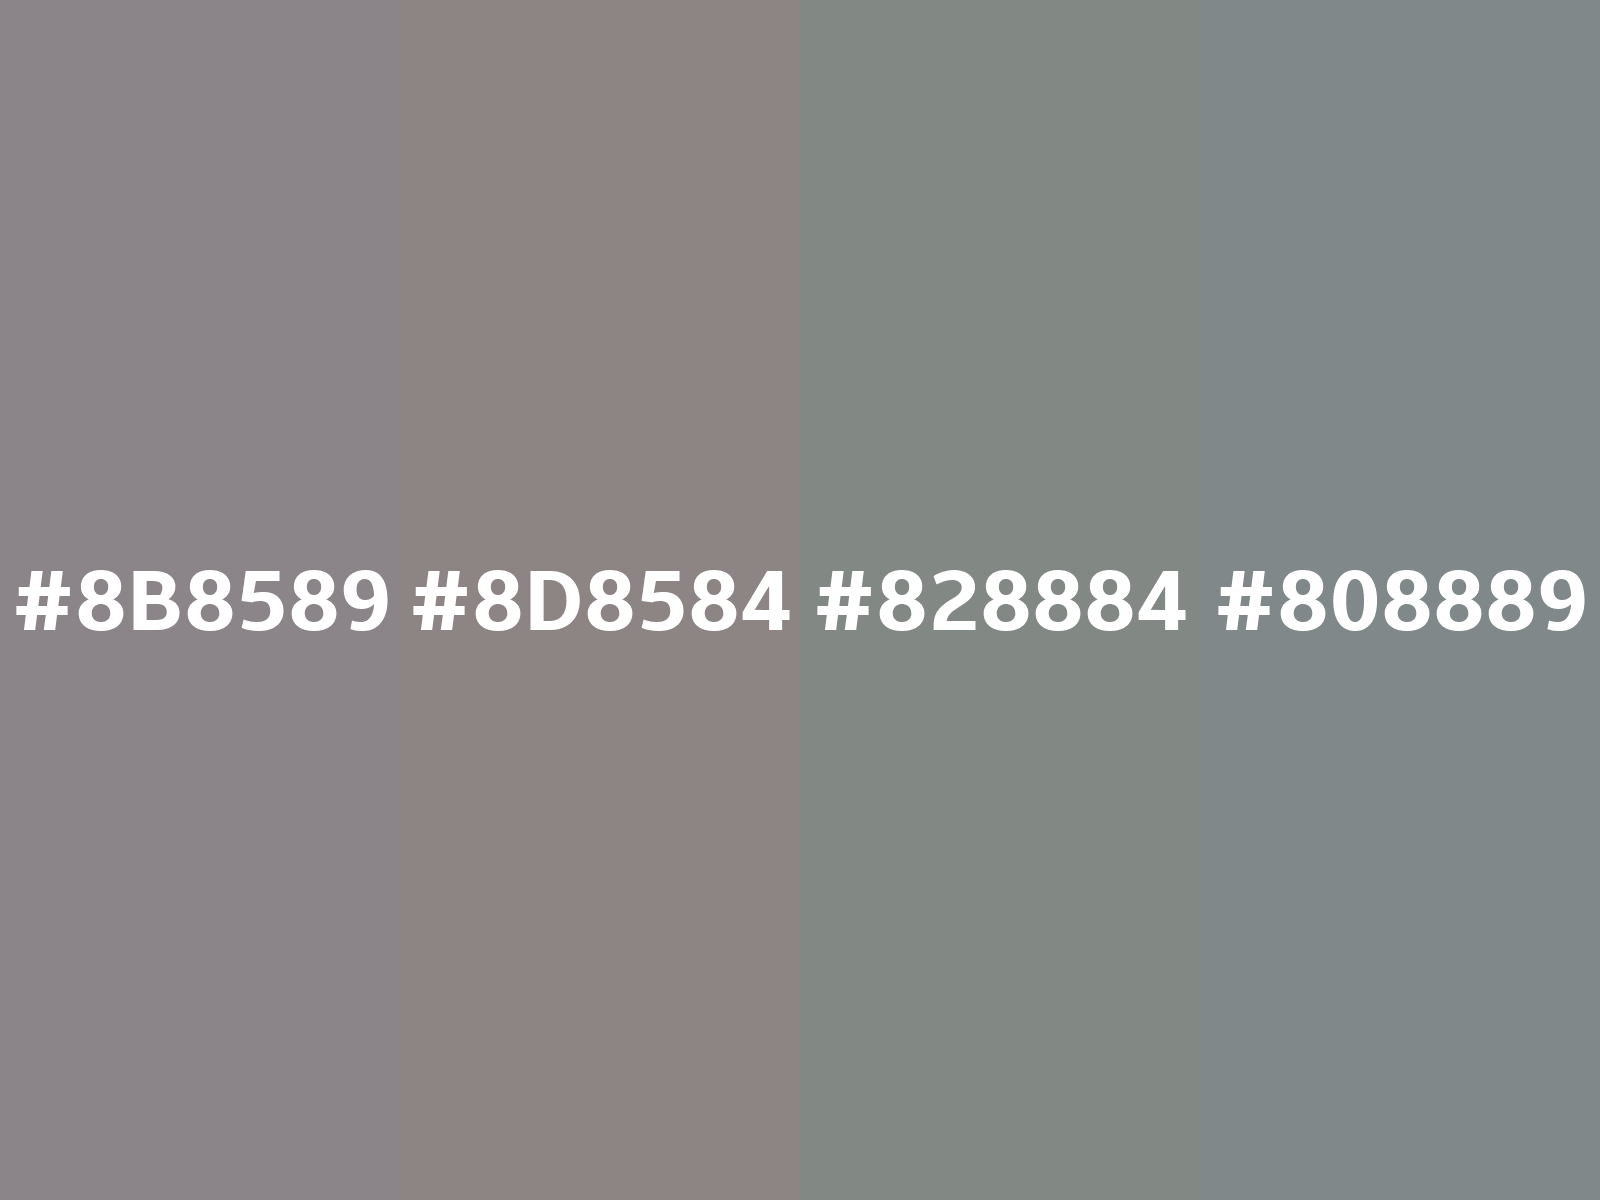 colorswall on X: Tints of Taupe Grey color #8B8589 hex #8b8589, #979195,  #a29da1, #aeaaac, #b9b6b8, #c5c2c4, #d1ced0, #dcdadc, #e8e7e7, #f3f3f3  #colors #palette   / X